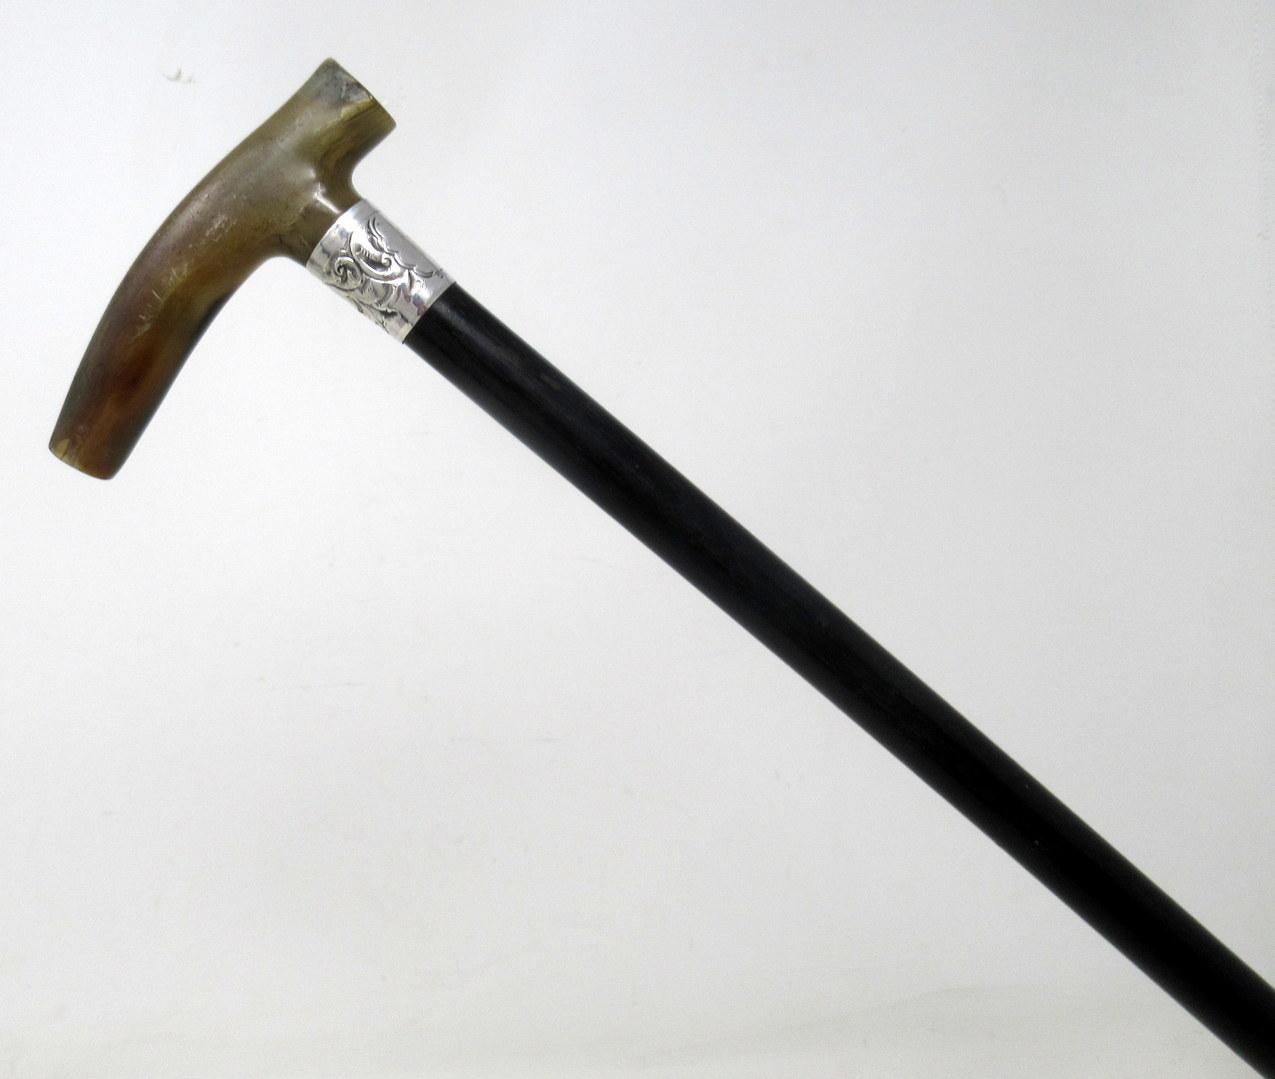 Stylish ebonised lady’s or gentleman’s walking stick with cow horn tau shaped handle and embossed sterling silver collar, complete with its original polished brass ferrule, which is a little worn. 

Mark of T. Chetland & Co. Assay mark Birmingham